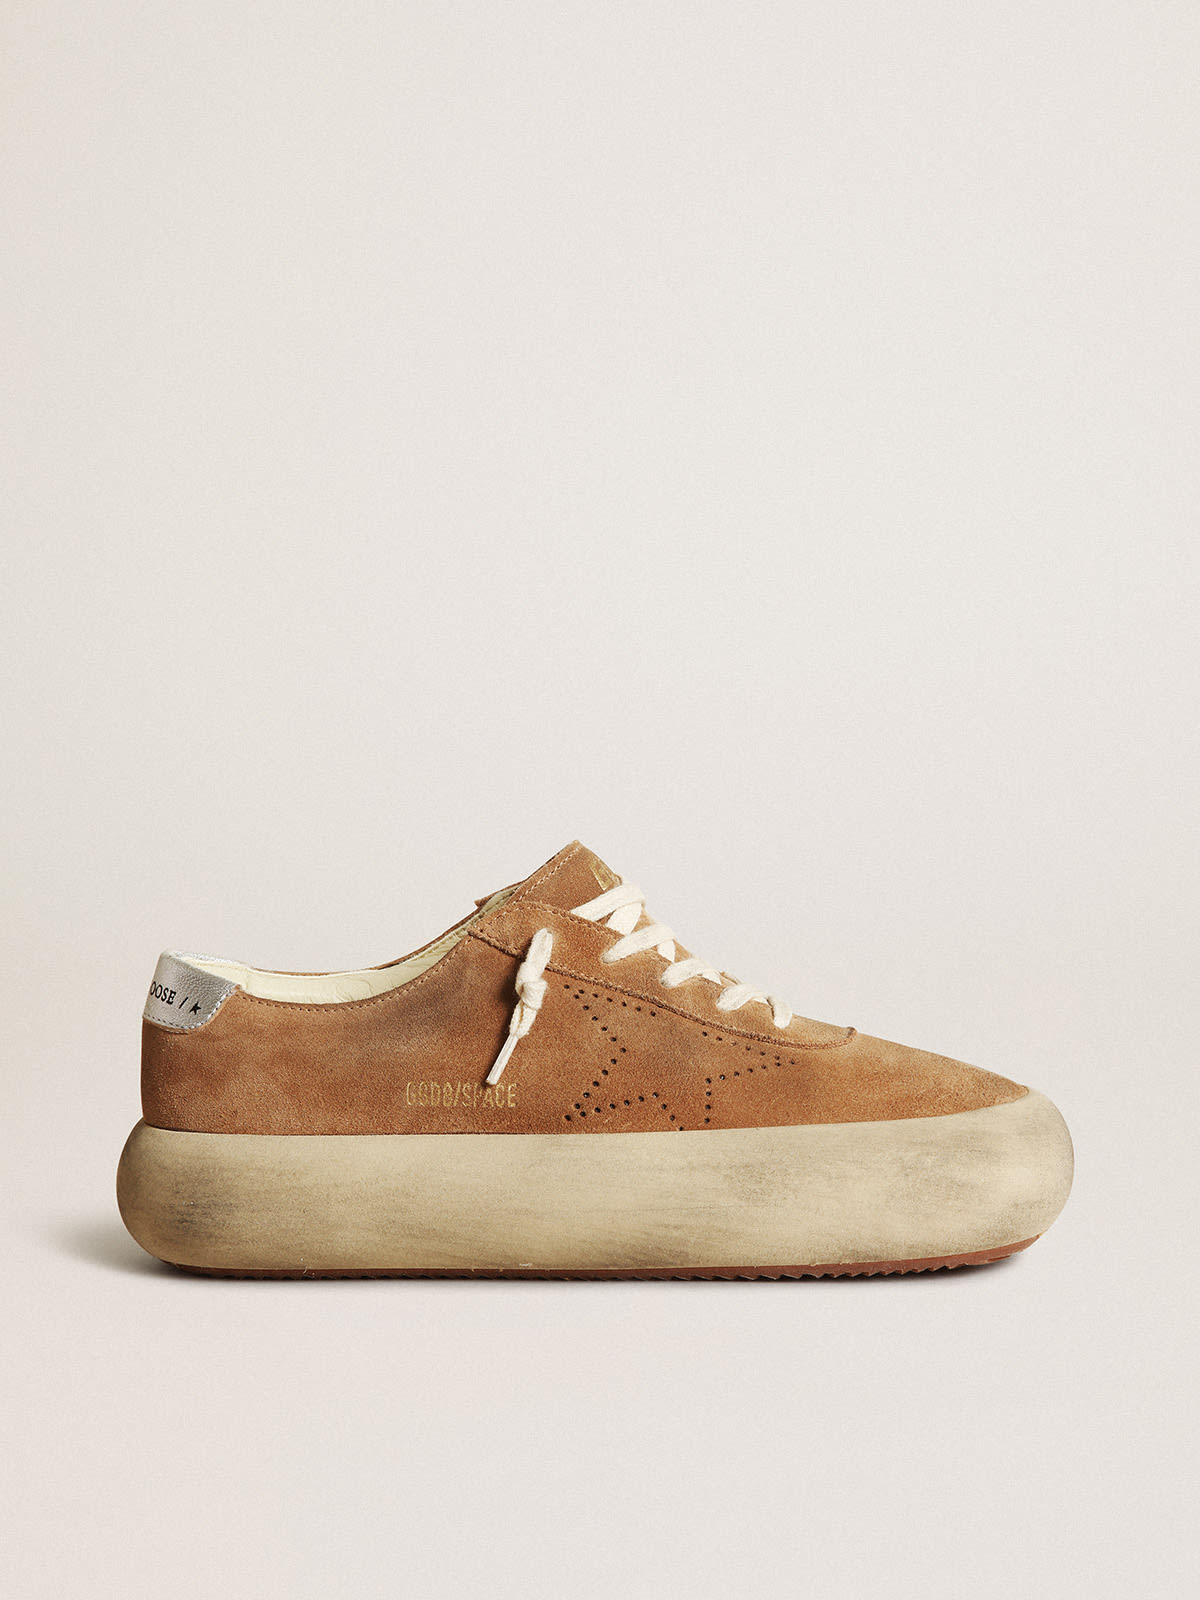 Golden Goose - Women's Space-Star shoes in tobacco-colored suede with perforated star and silver metallic leather heel tab in 